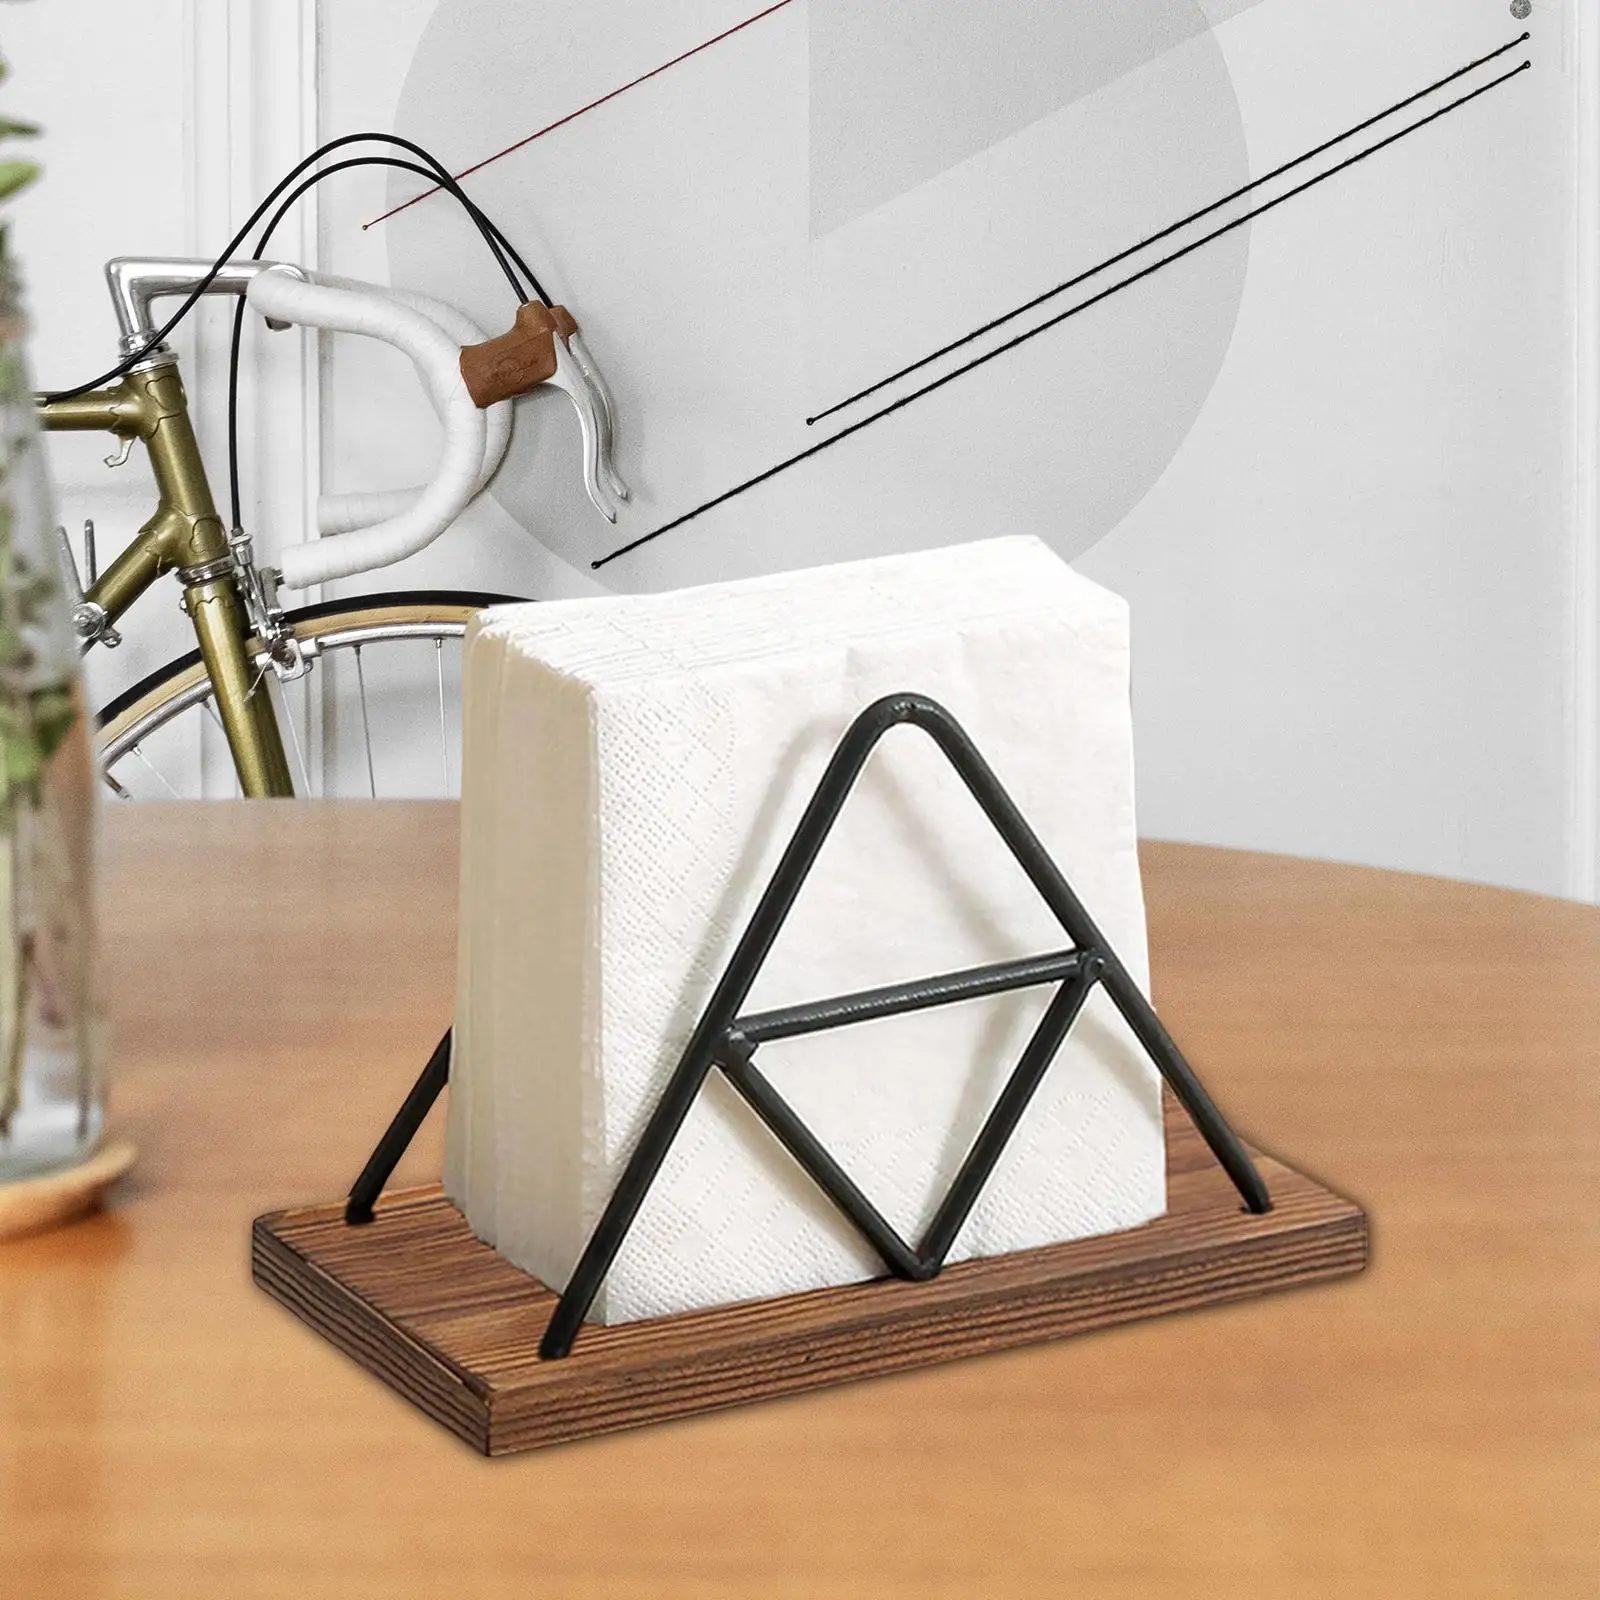 Metal Paper Napkin Holder Storage Organizer Dinning Accessories Tabletop Paper Napkin Holder Stand for Home Dining Table Picnic